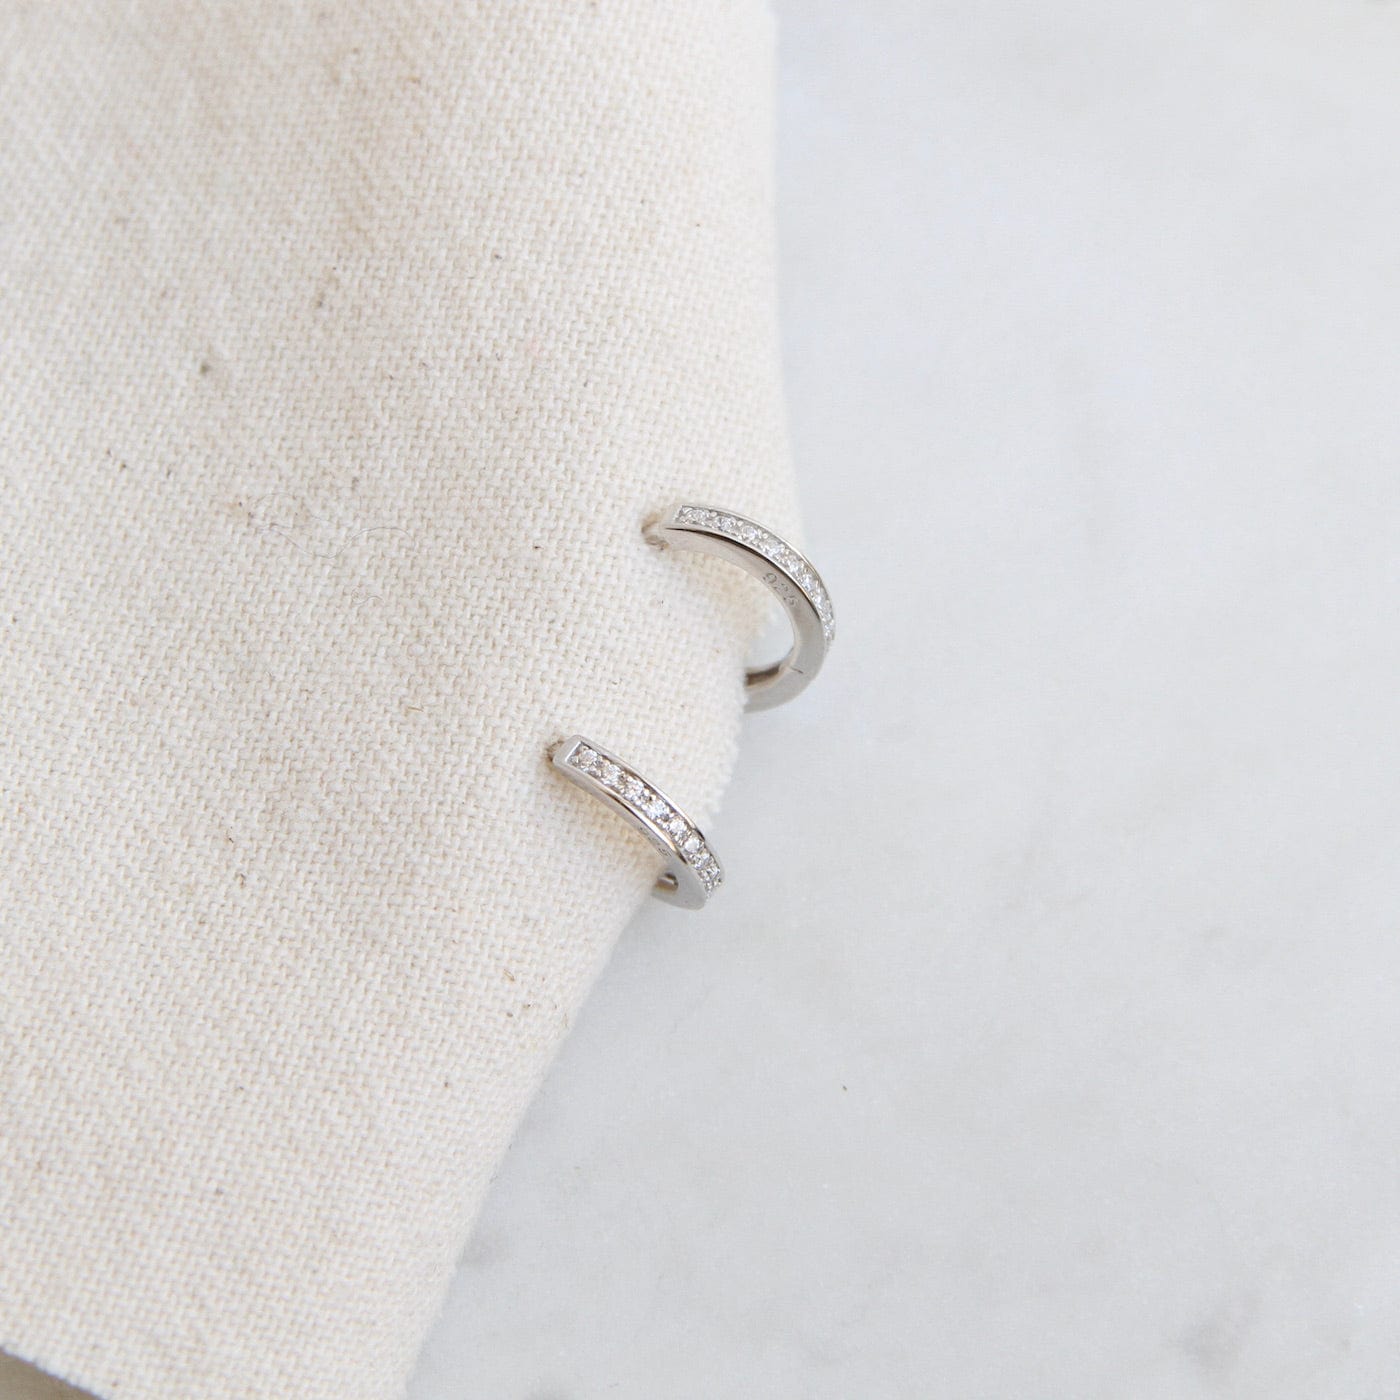 EAR Coco Huggie - Sterling Silver with CZ